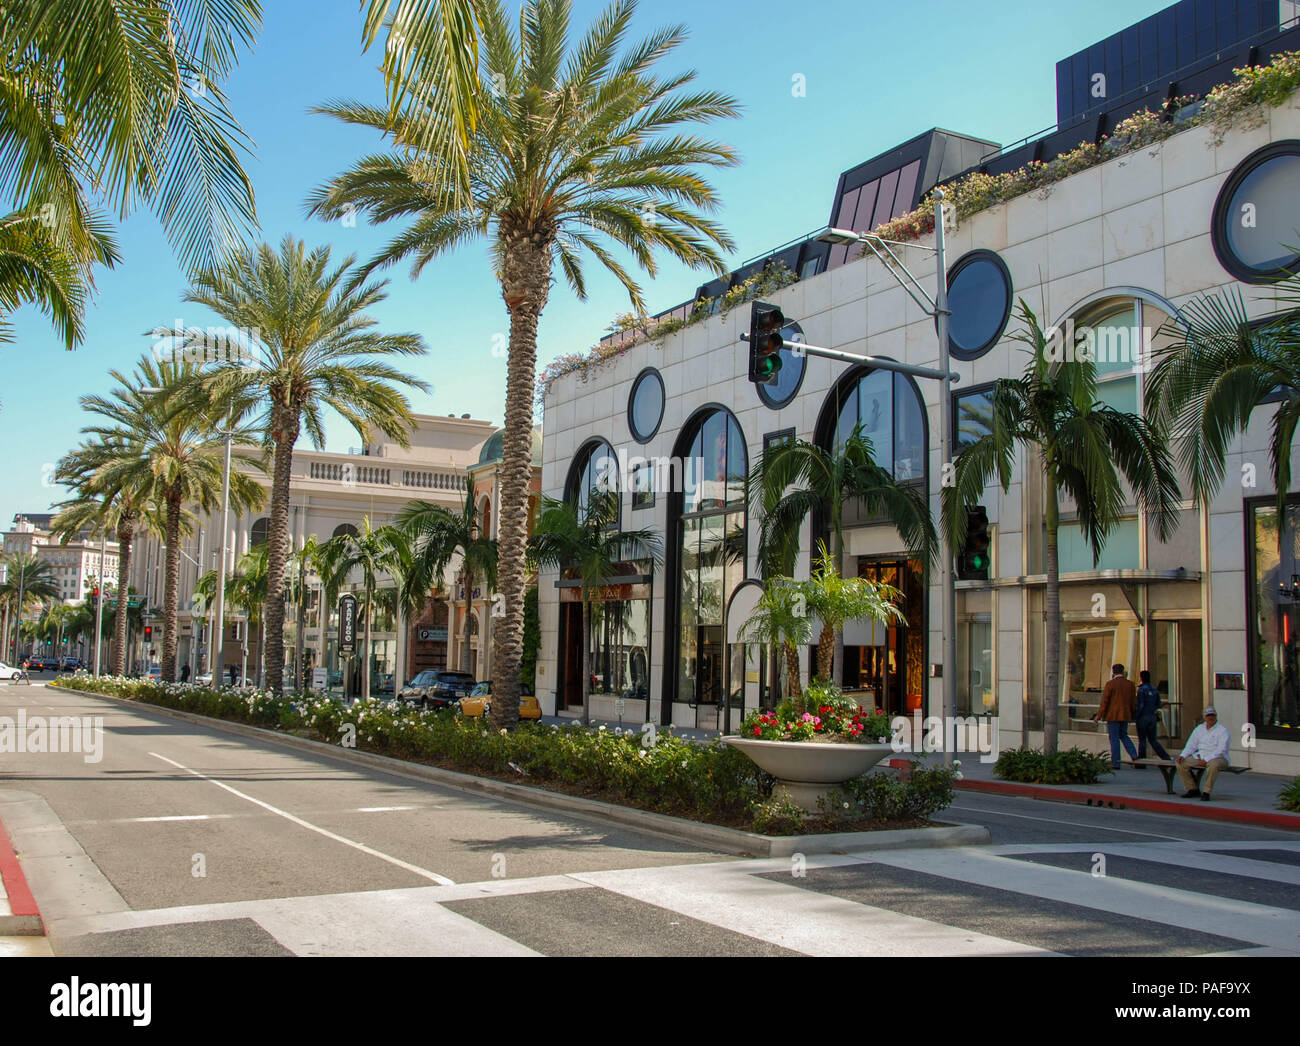 Wide angle view of designer shops and palm trees on Rodeo Drive, Beverly Hills, Los Angeles Stock Photo